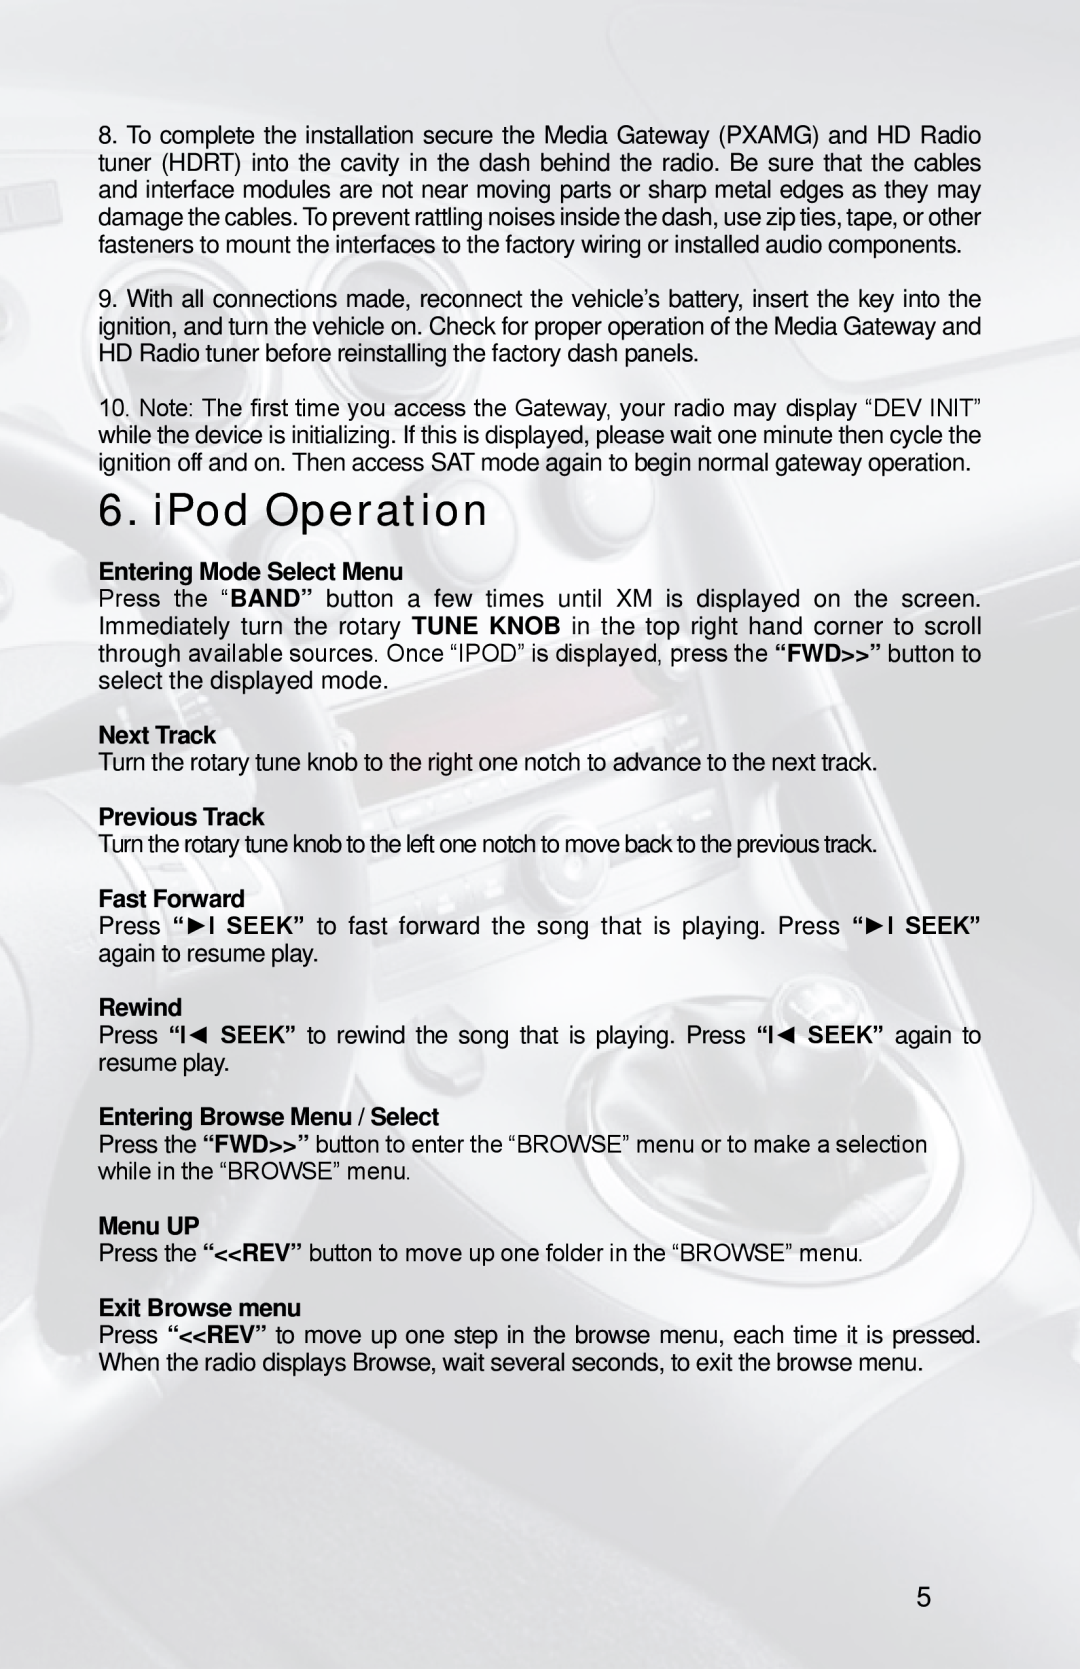 iSimple PXAMG, PGHGM2 iPod Operation, Entering Mode Select Menu, Next Track, Previous Track, Fast Forward, Rewind, Menu UP 